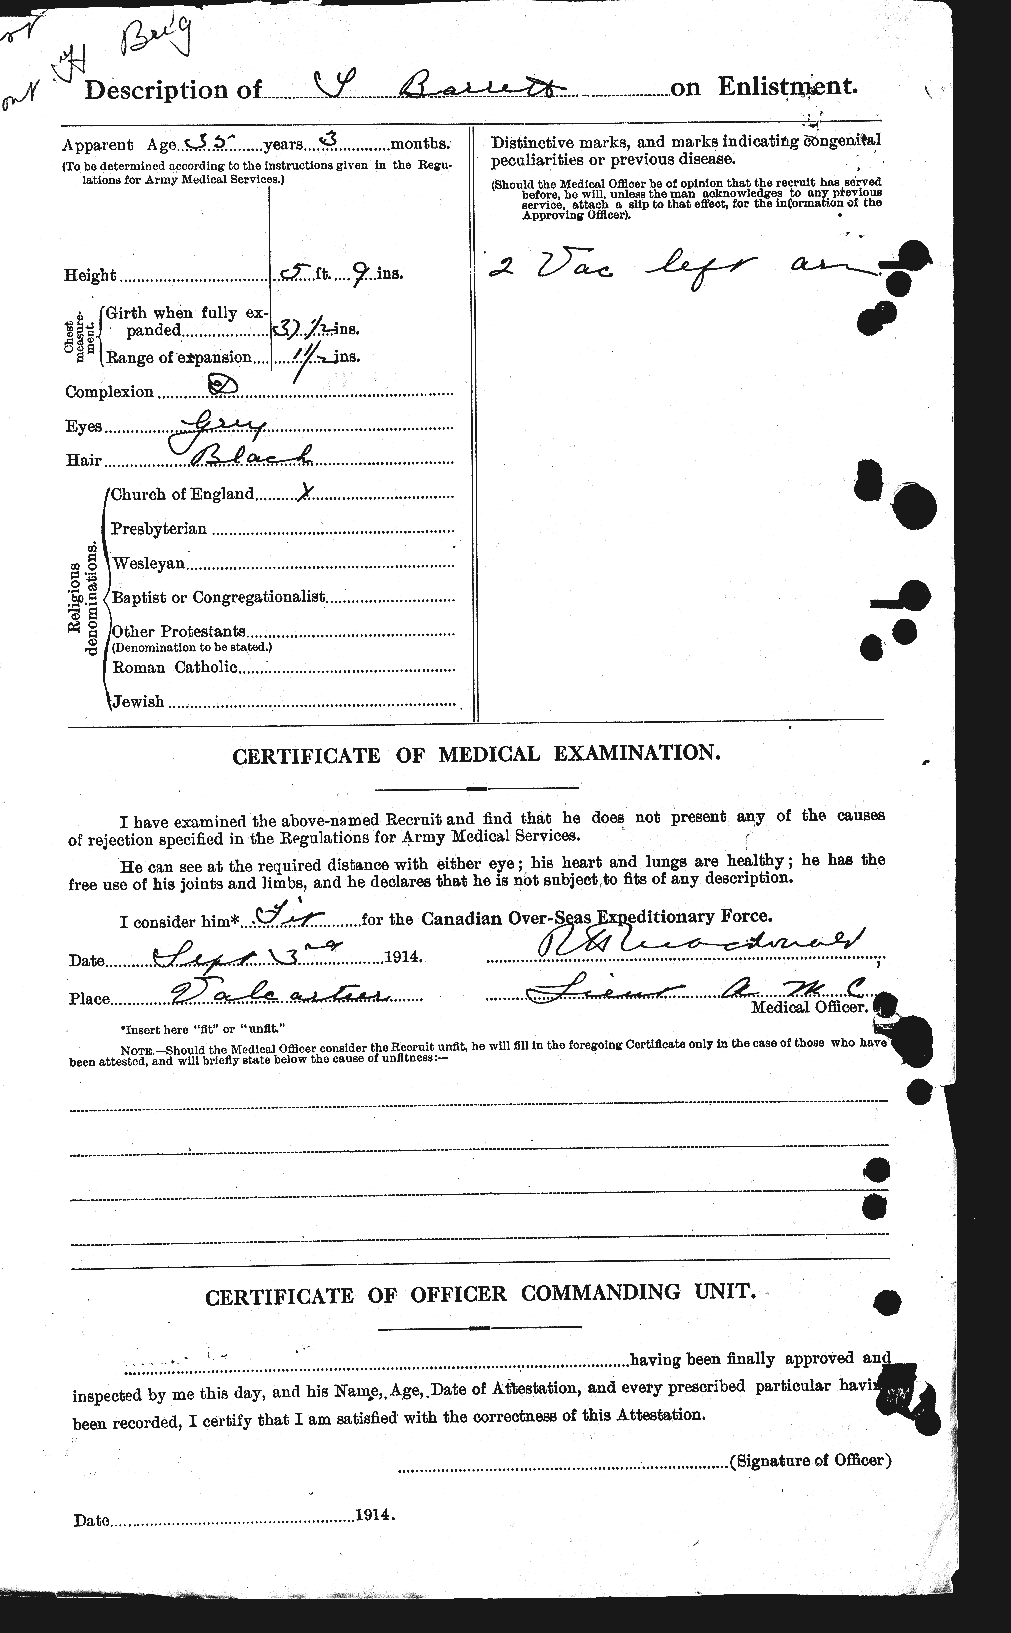 Personnel Records of the First World War - CEF 220183b